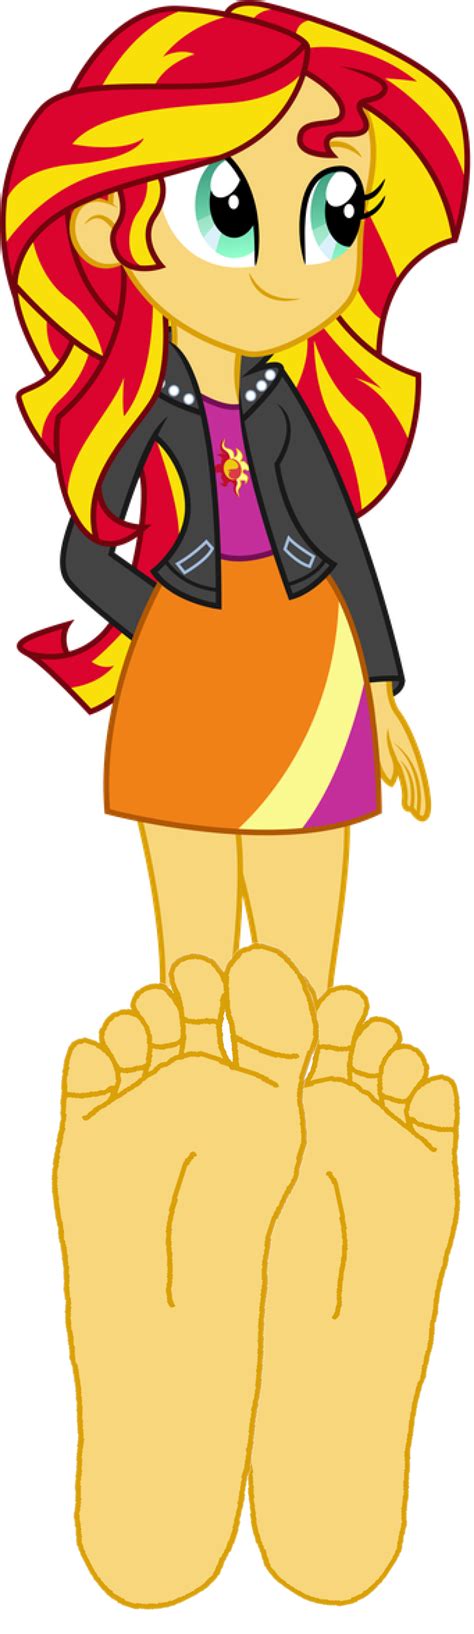 Sunset Shimmers Feet By Jerrybonds1995 On Deviantart